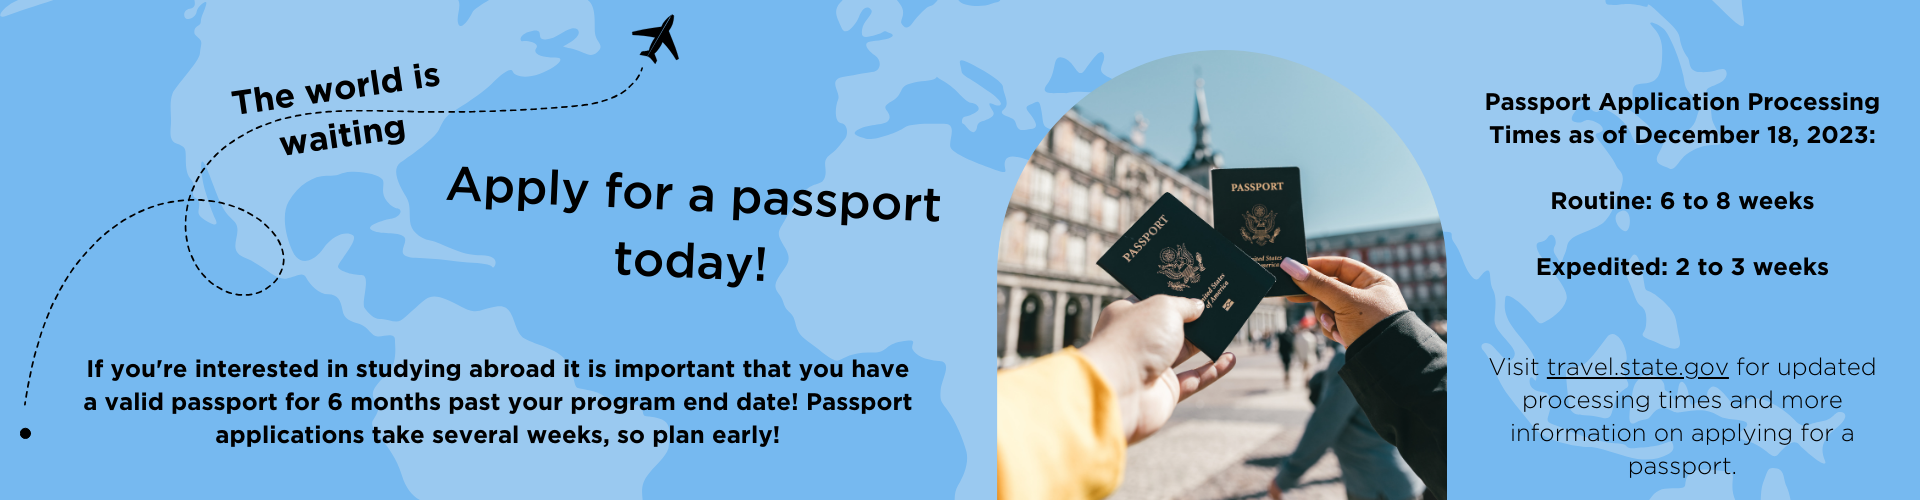 If you're interested in studying abroad it is important that you have a valid passport for 6 months past your program end date! Passport applications take several weeks, so plan early! Passport Application Processing Times as of December 18, 2023: Routine: 6 to 8 weeks Expedited: 2 to 3 weeks Visit travel.state.gov for updated processing times and more information on applying for a passport.